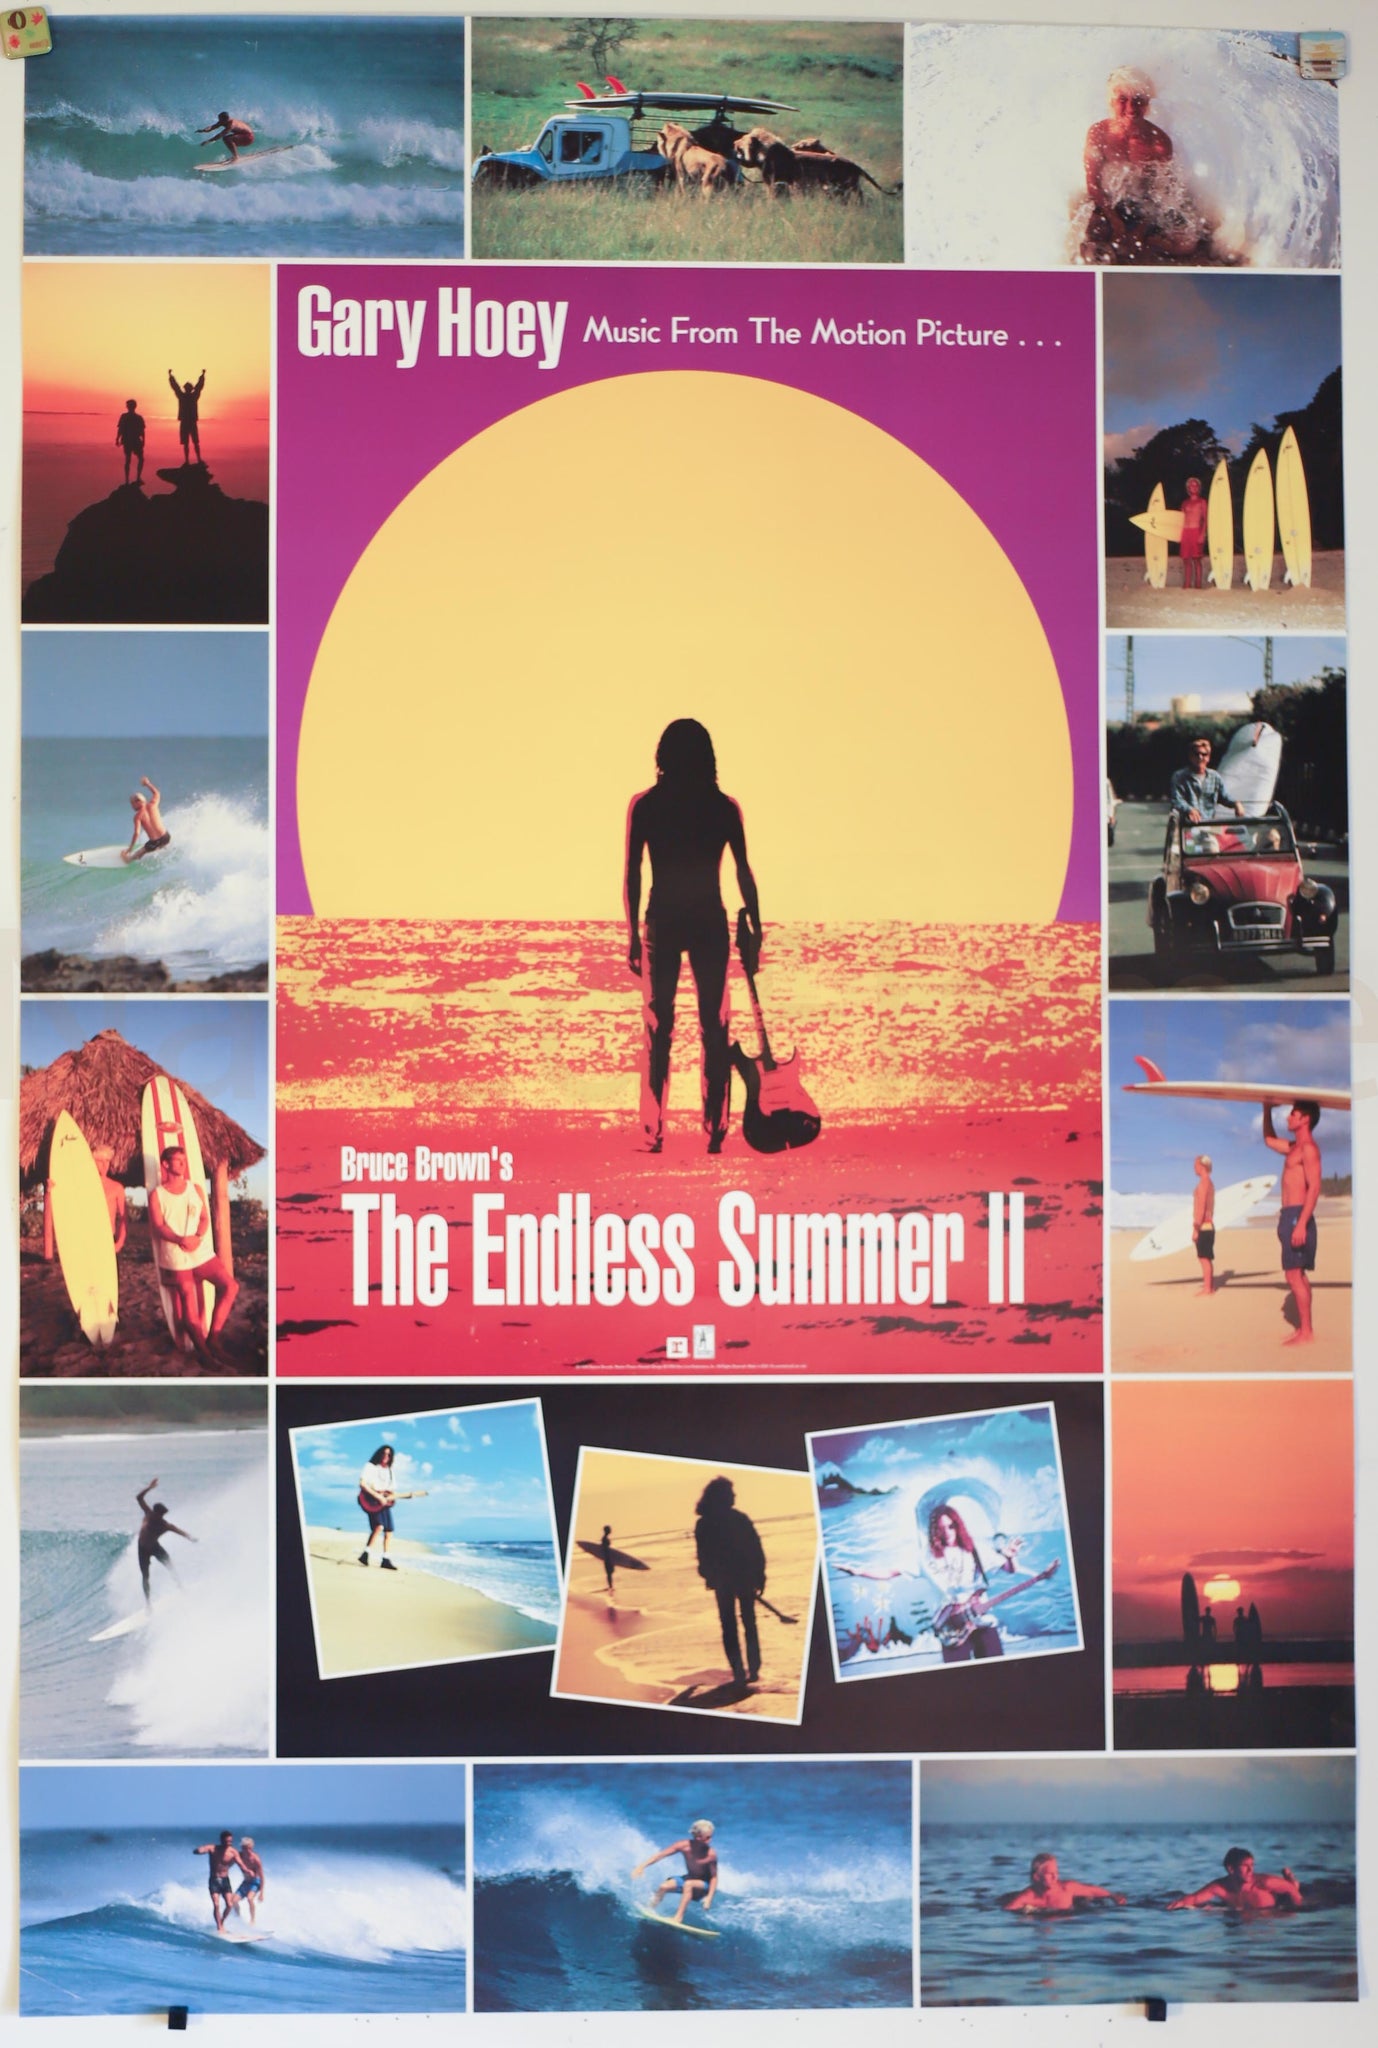 The Endless Summer II Soundtrack Poster.